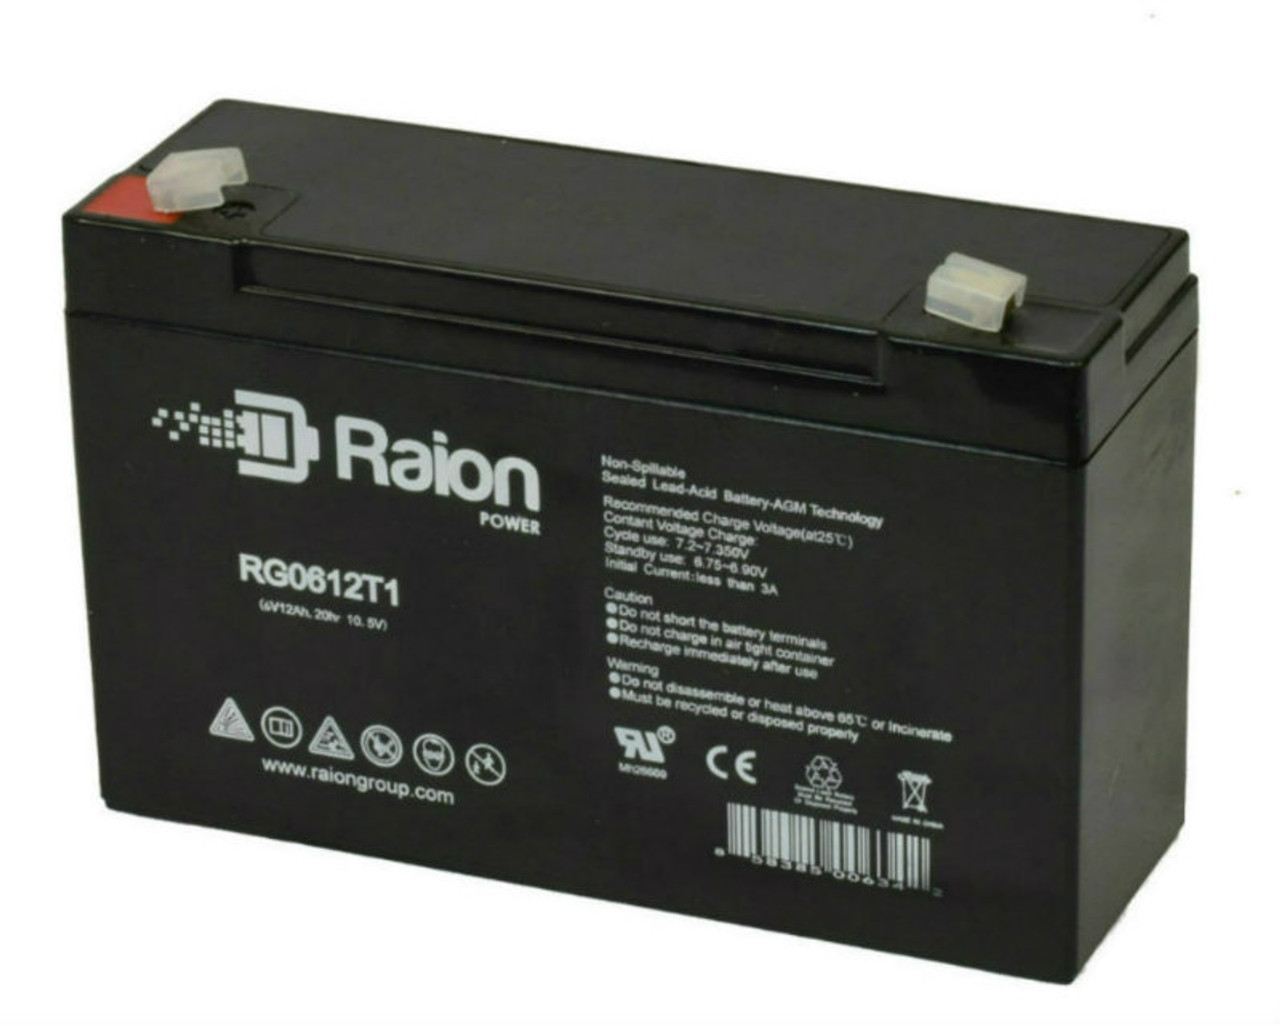 Raion Power RG06120T1 Replacement Battery for Ultramax NP10-6